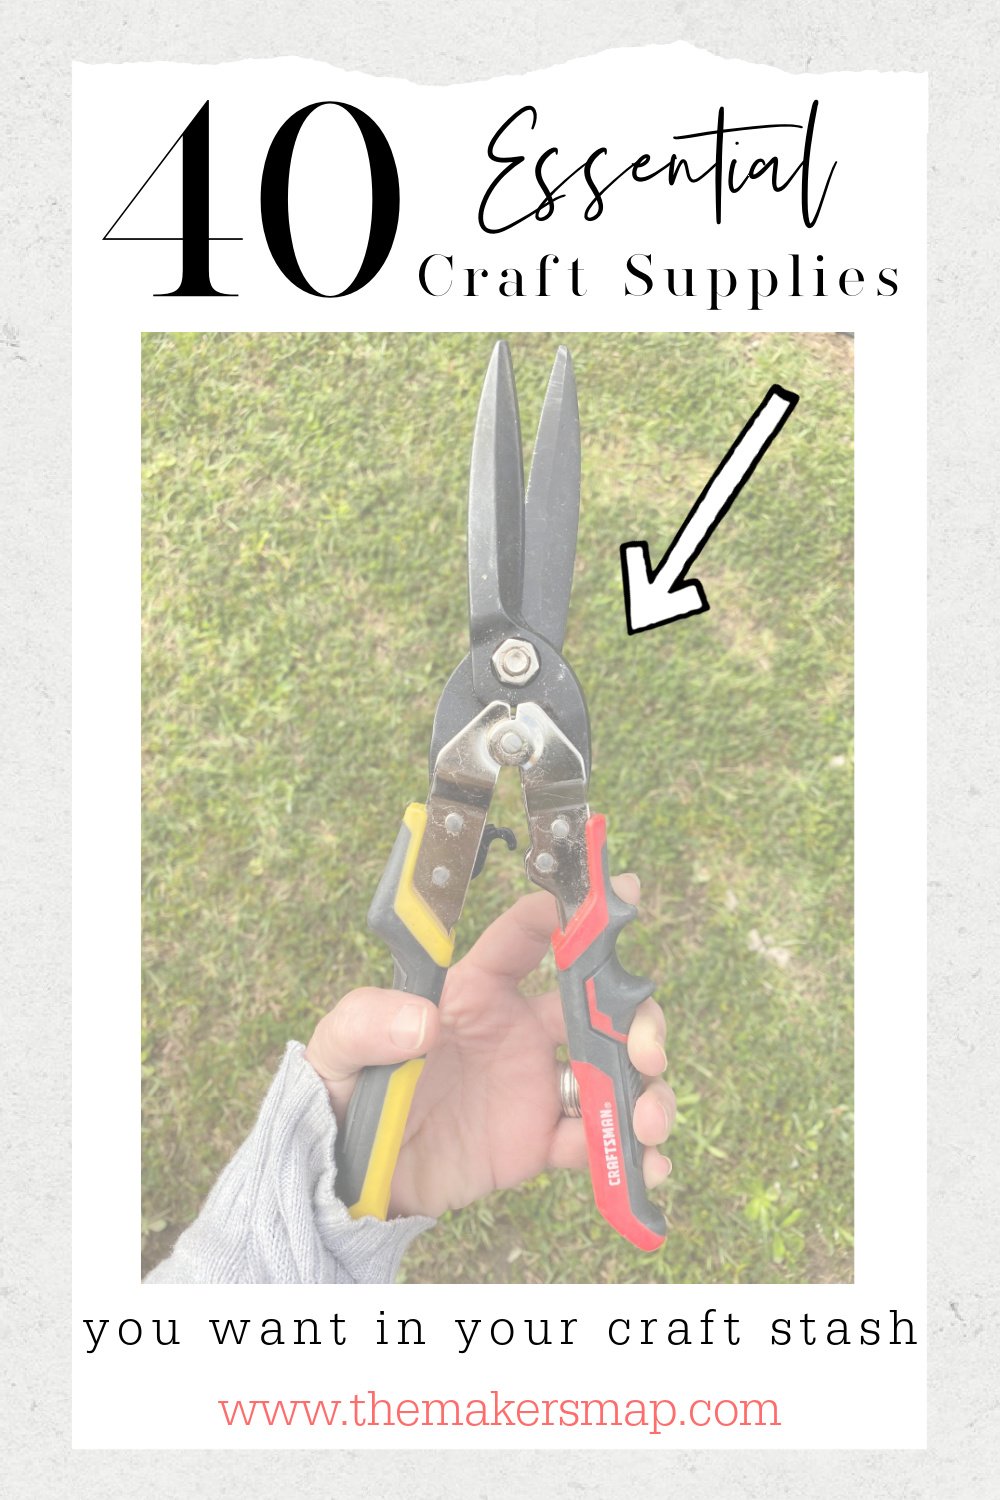 Get your craft on! Here are just a few things that are staples and you will  ultimately need if you plan to